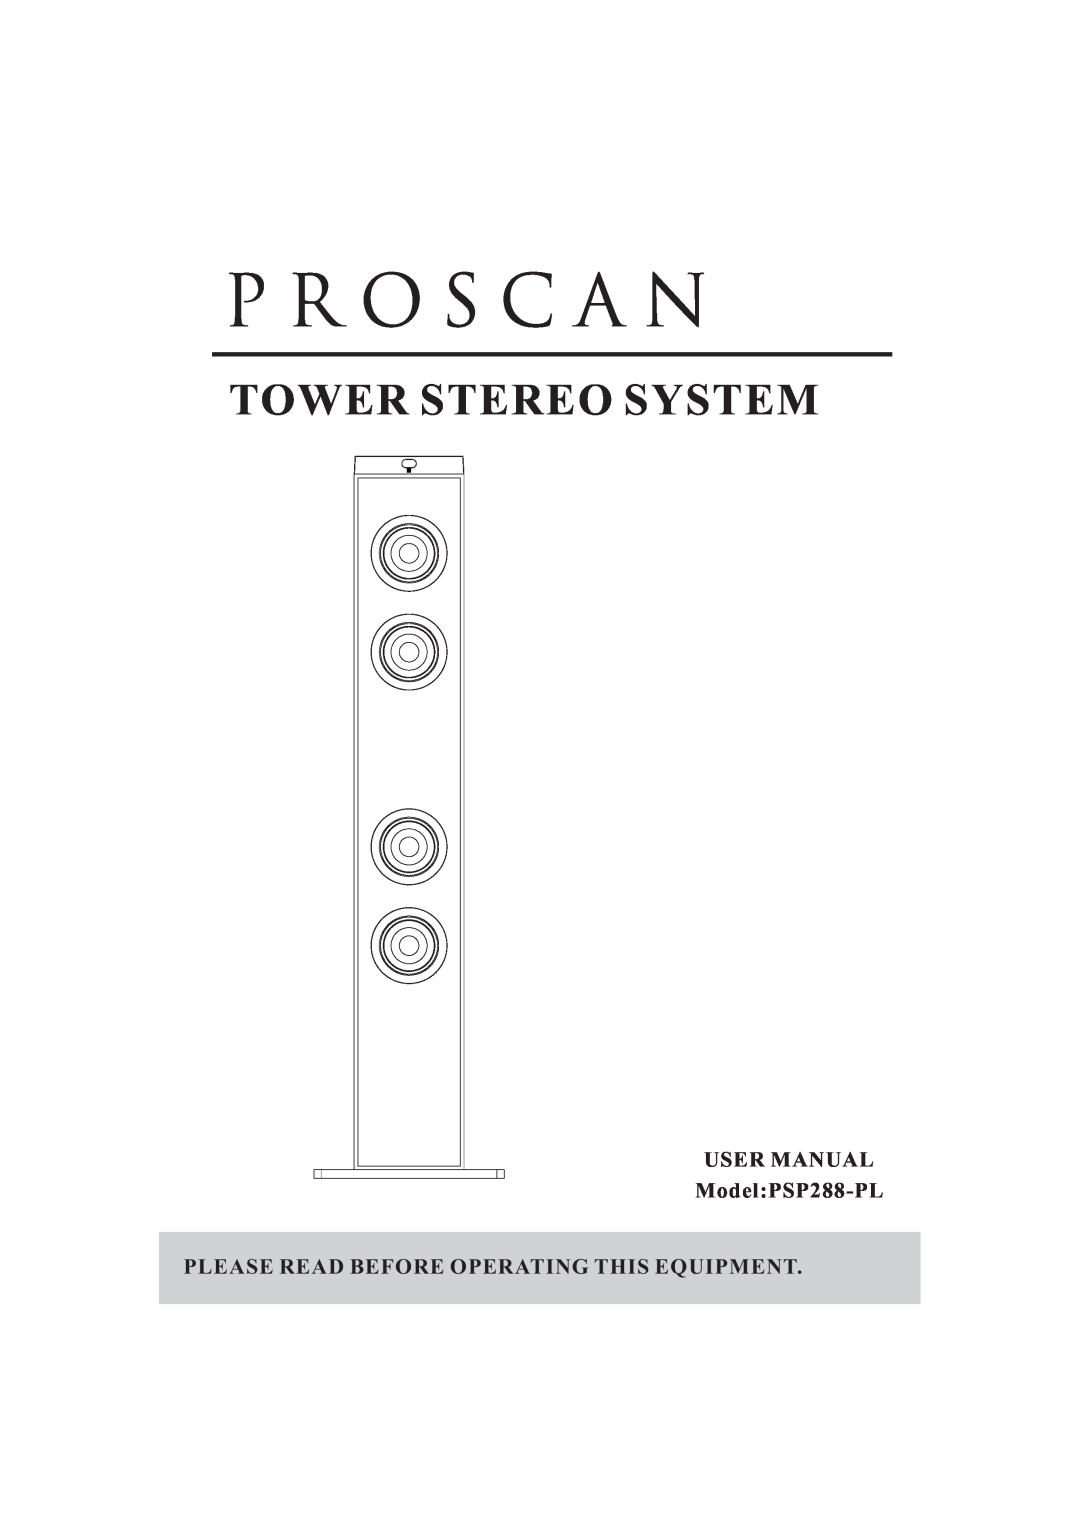 ProScan PSP288-PL user manual To Er Stereo System, Please Read Before Operating This Equipment 